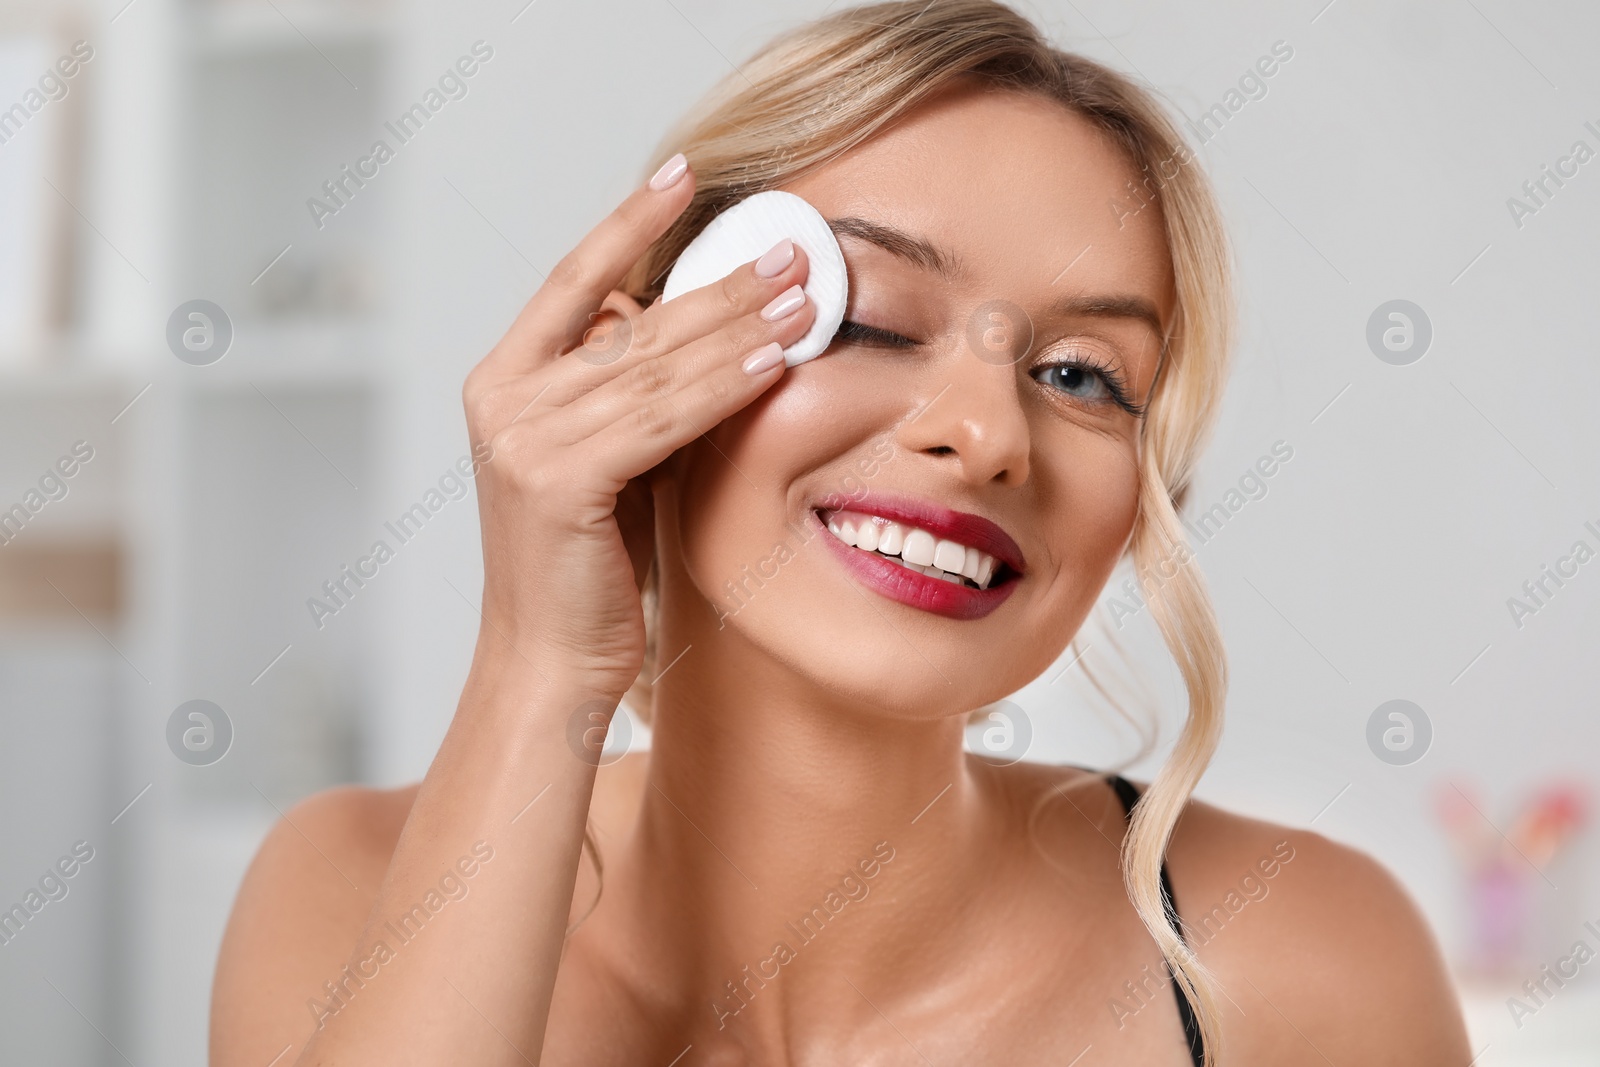 Photo of Smiling woman removing makeup with cotton pad indoors, closeup